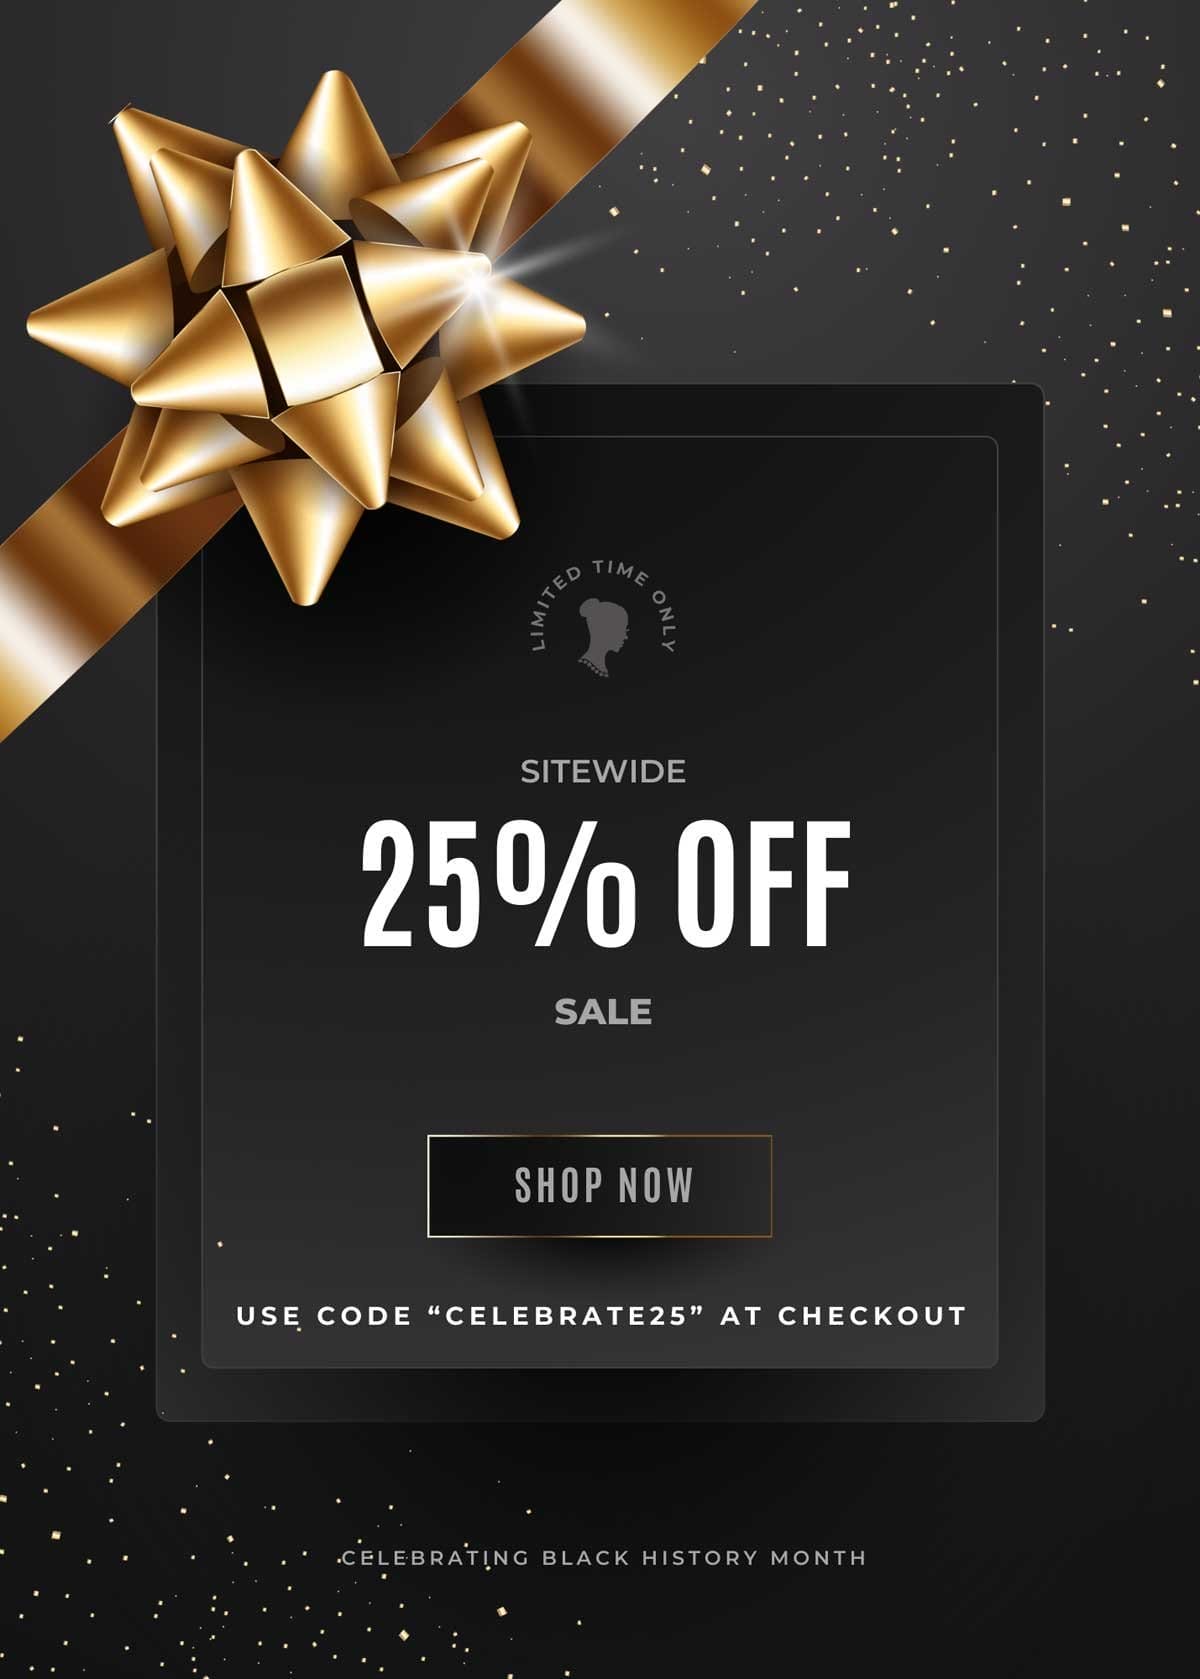 25% off sitewide sale with code "celebrate25"